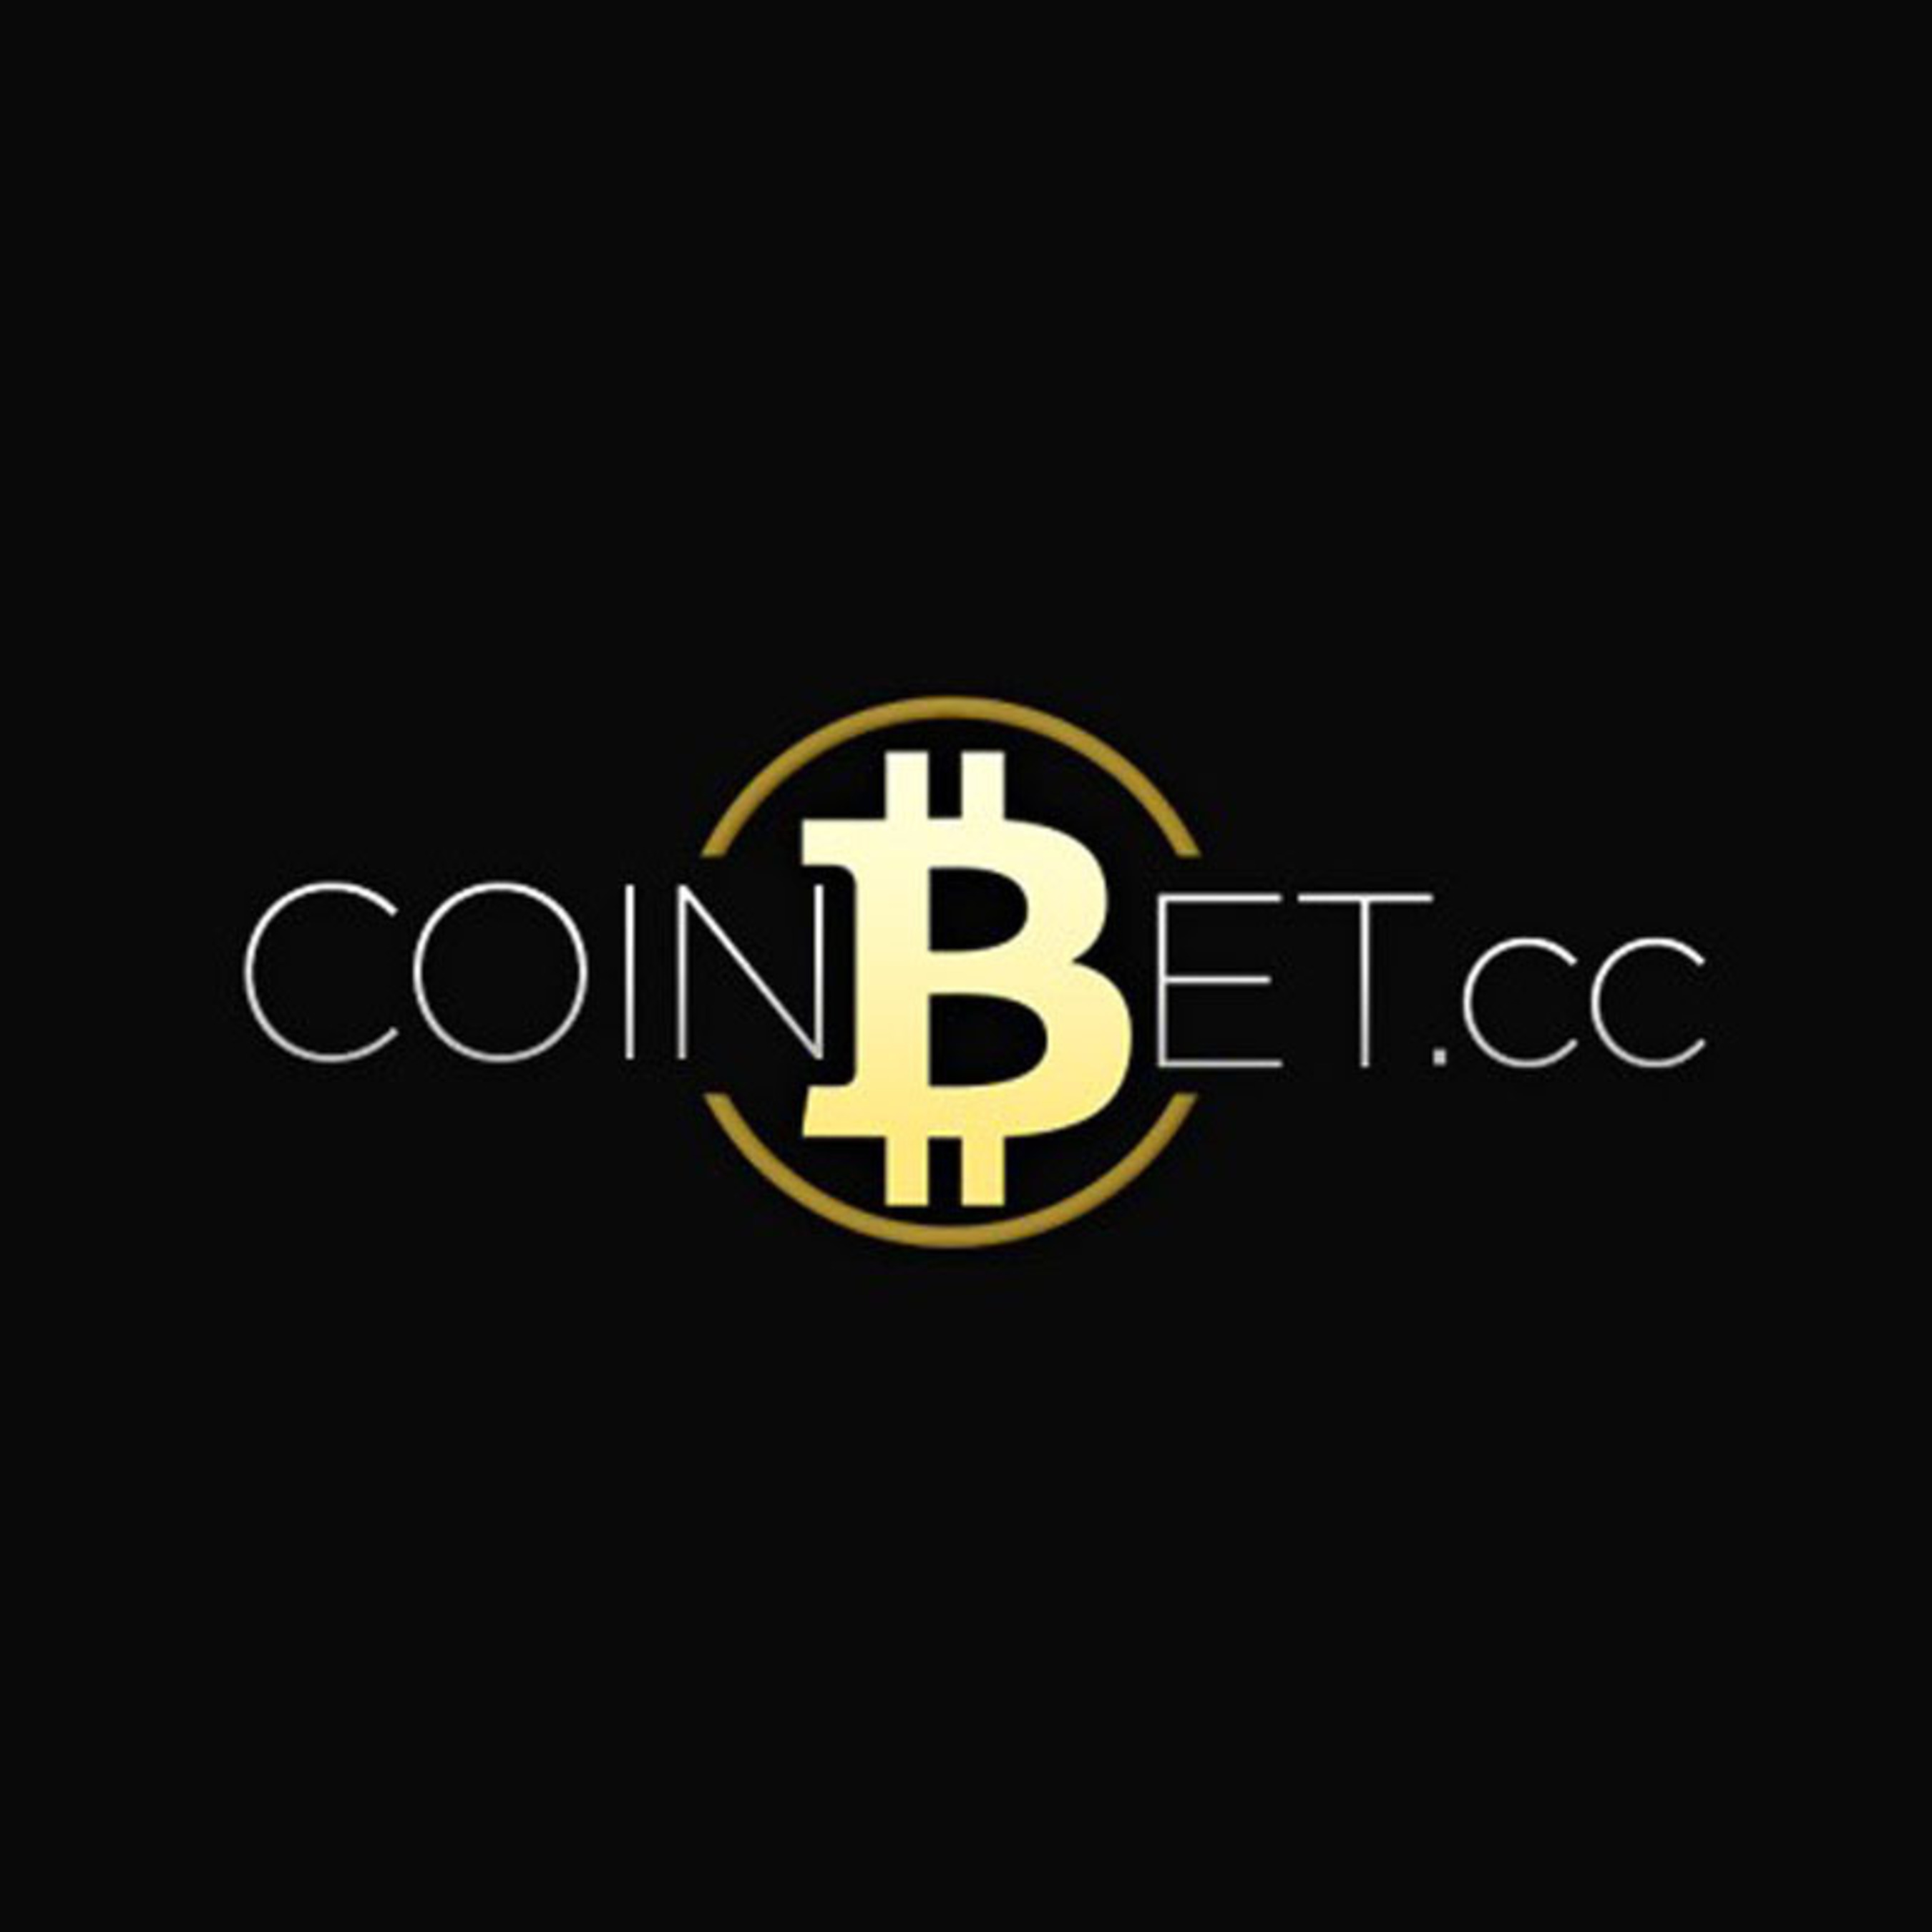 Voted #1 BitCoin based online sports book and casino. (PRNewsFoto/CoinBet Interactive Gaming) (PRNewsFoto/COINBET INTERACTIVE GAMING)